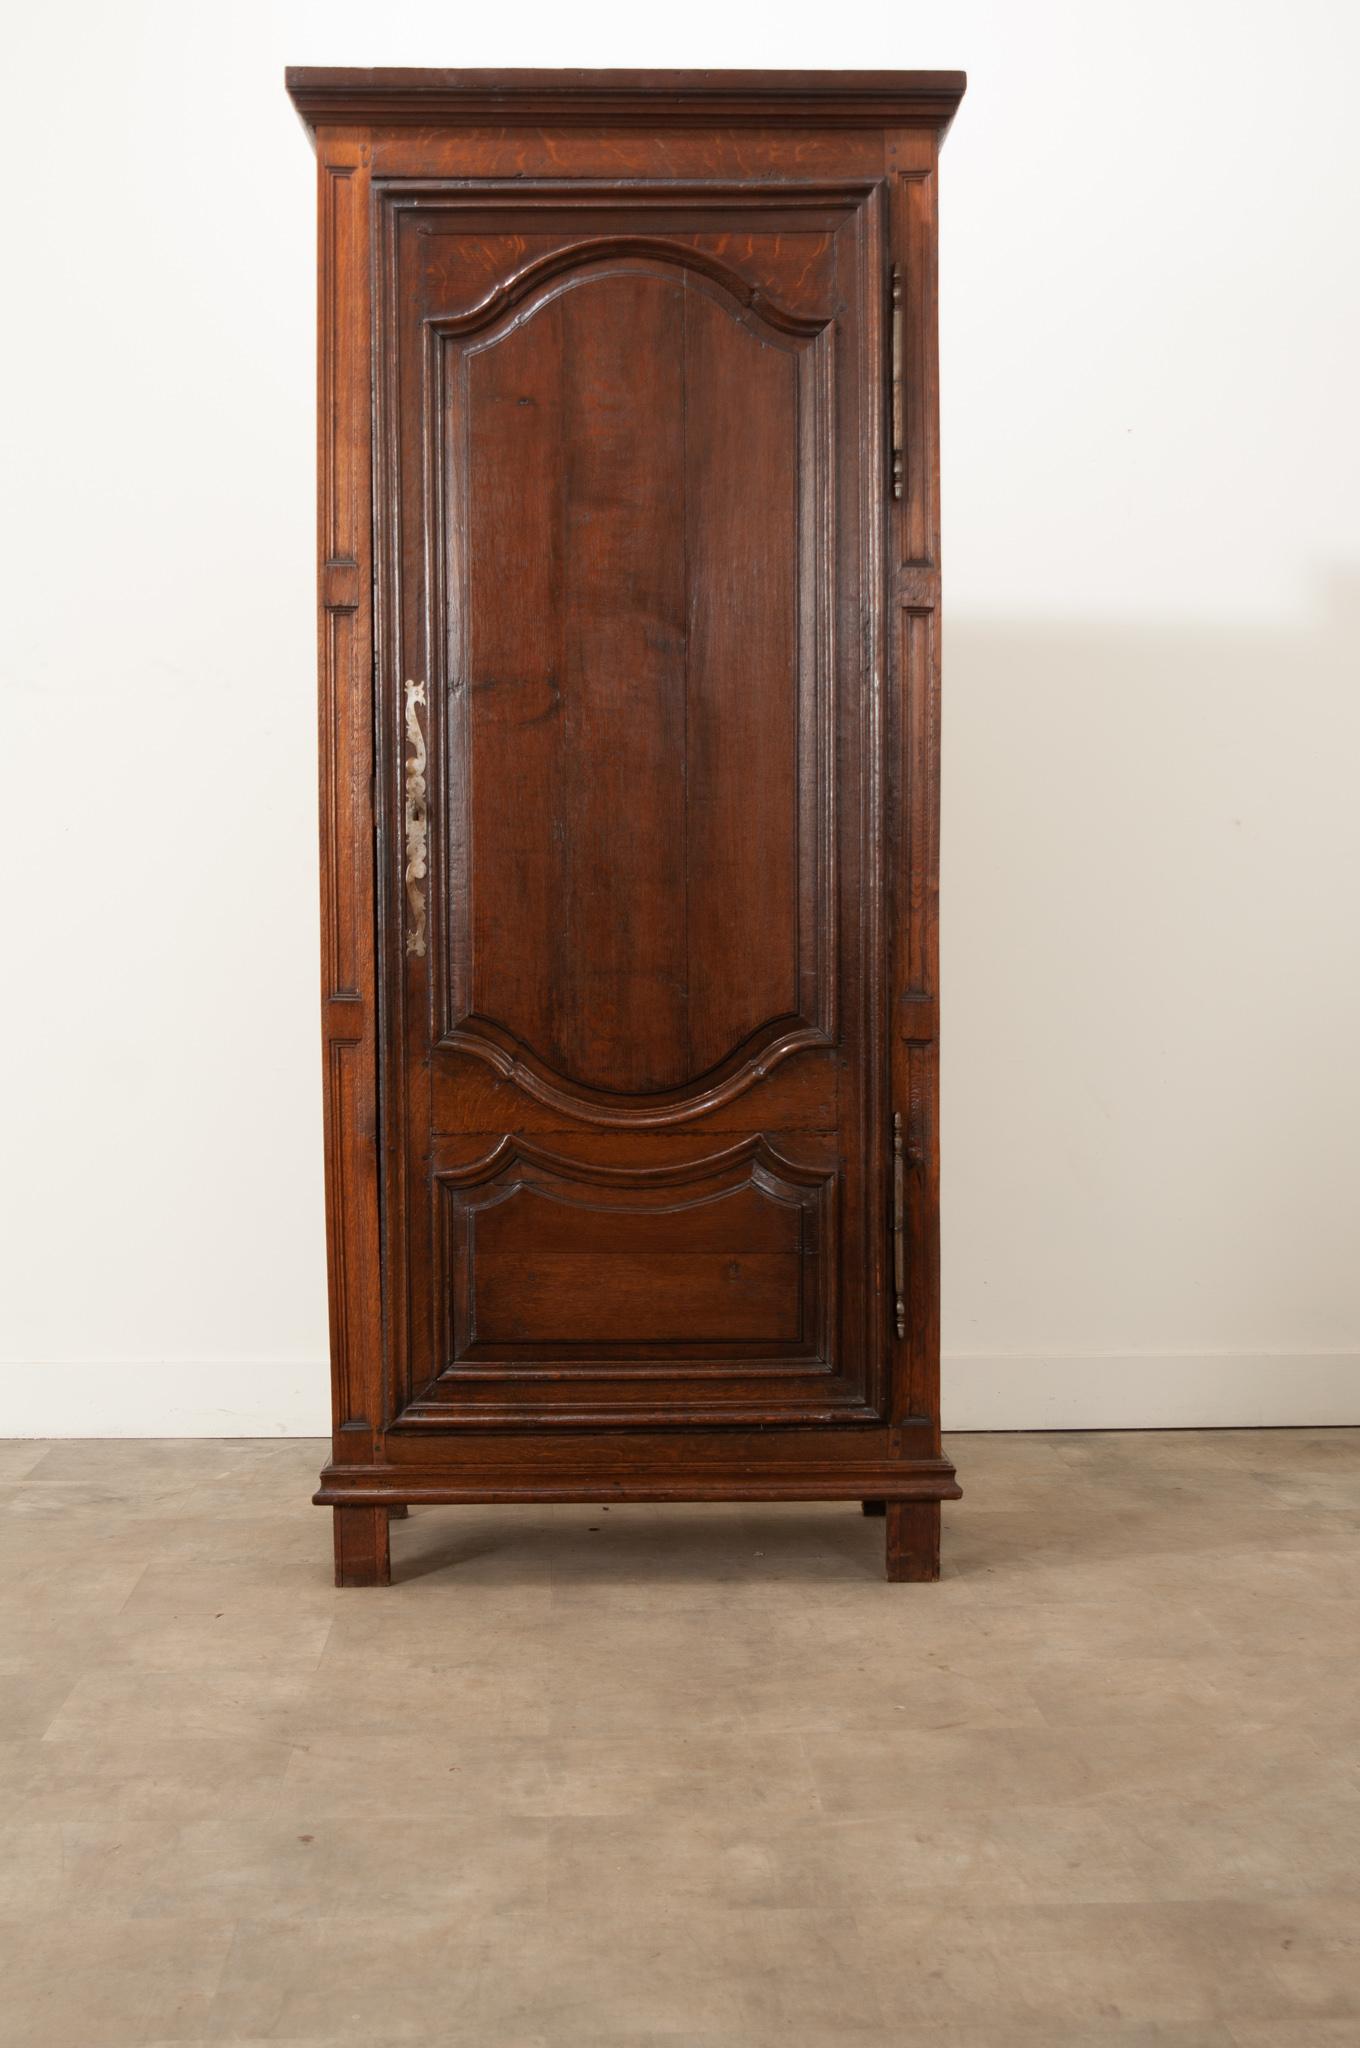 This lovely antique bonnetiere, made of solid oak of varying tones and textures, was carved and constructed in 18th century France, circa 1750. This wonderful cabinet features a single tall door that closes before its interior. The door is decorated